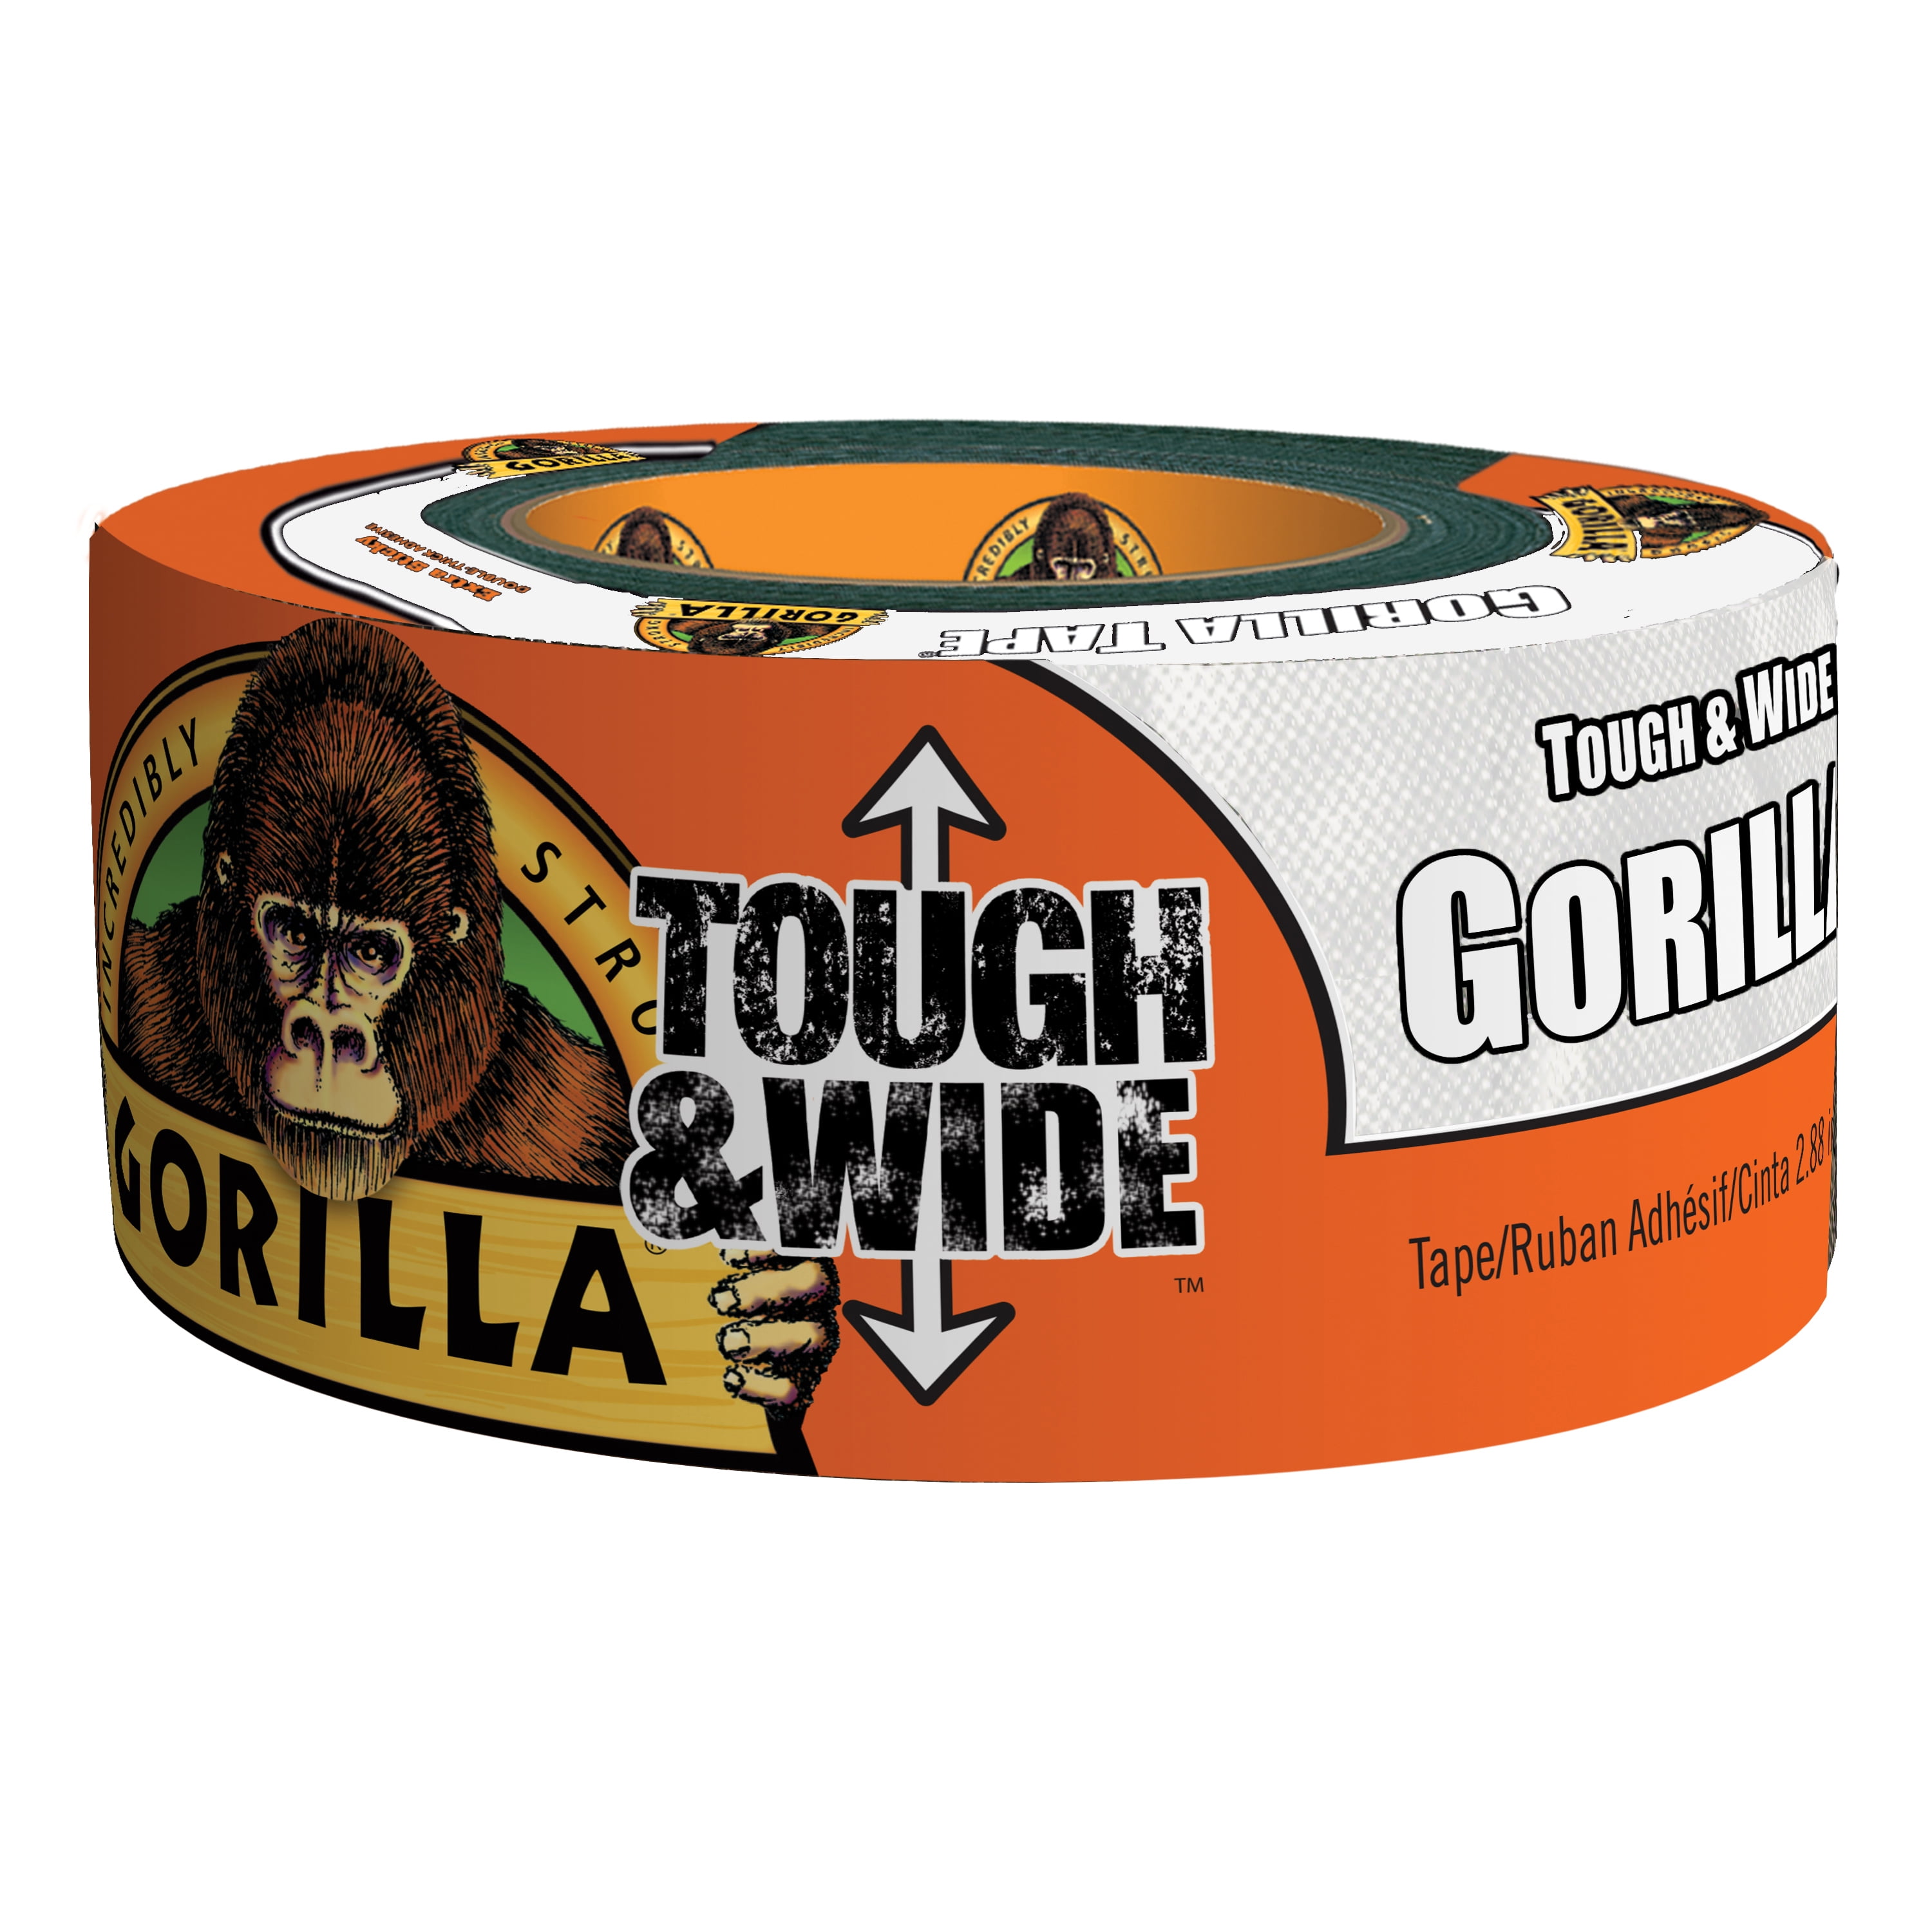 NEW GORILLA GLUE LARGE ROLL 2.88 X 30YD WIDE WORLDS TOUGHEST DUCT TAPE 5121462 